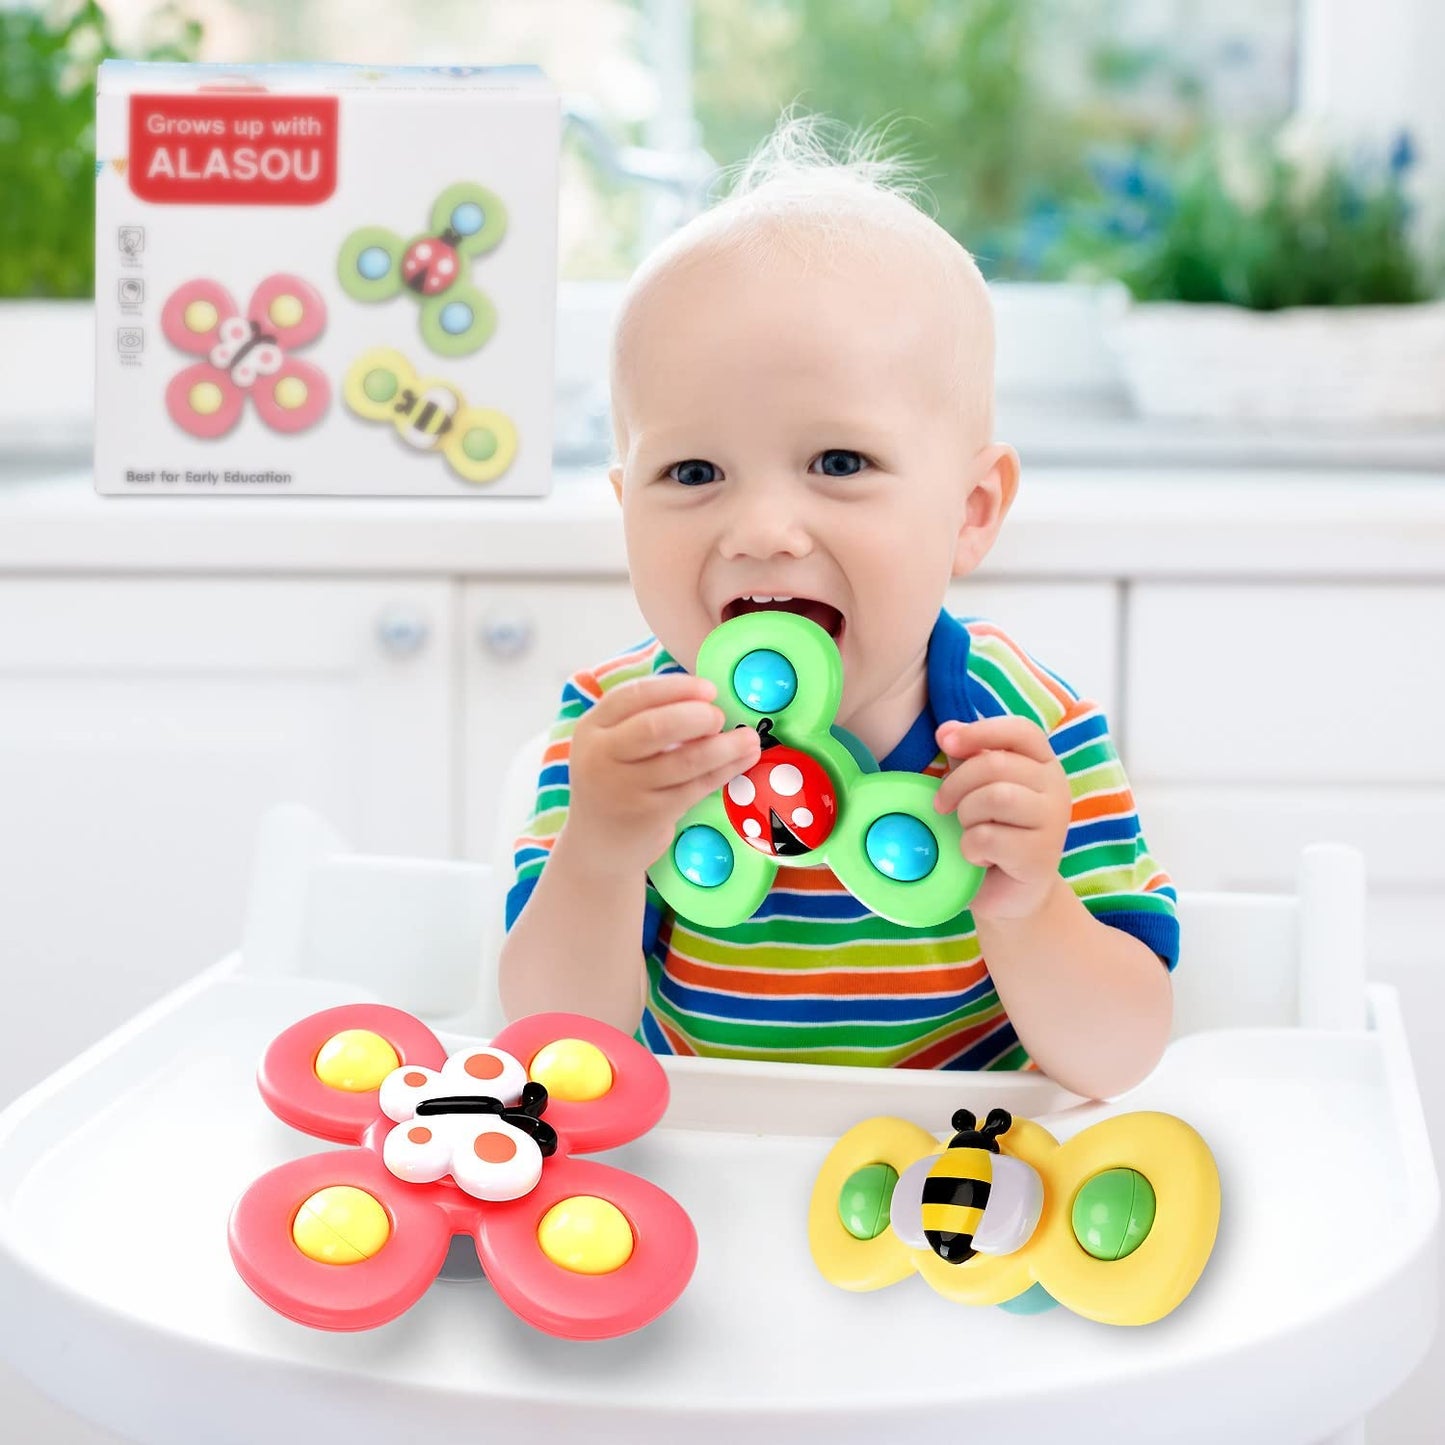 Set of 3 Suction Cup Spinner Toys for 1-2 Year Olds | Spinning Top Baby Toys for 12-18 Month Olds | Baby Gifts for 1 Year Olds | Sensory Toys for Toddlers 1-3 Years Old